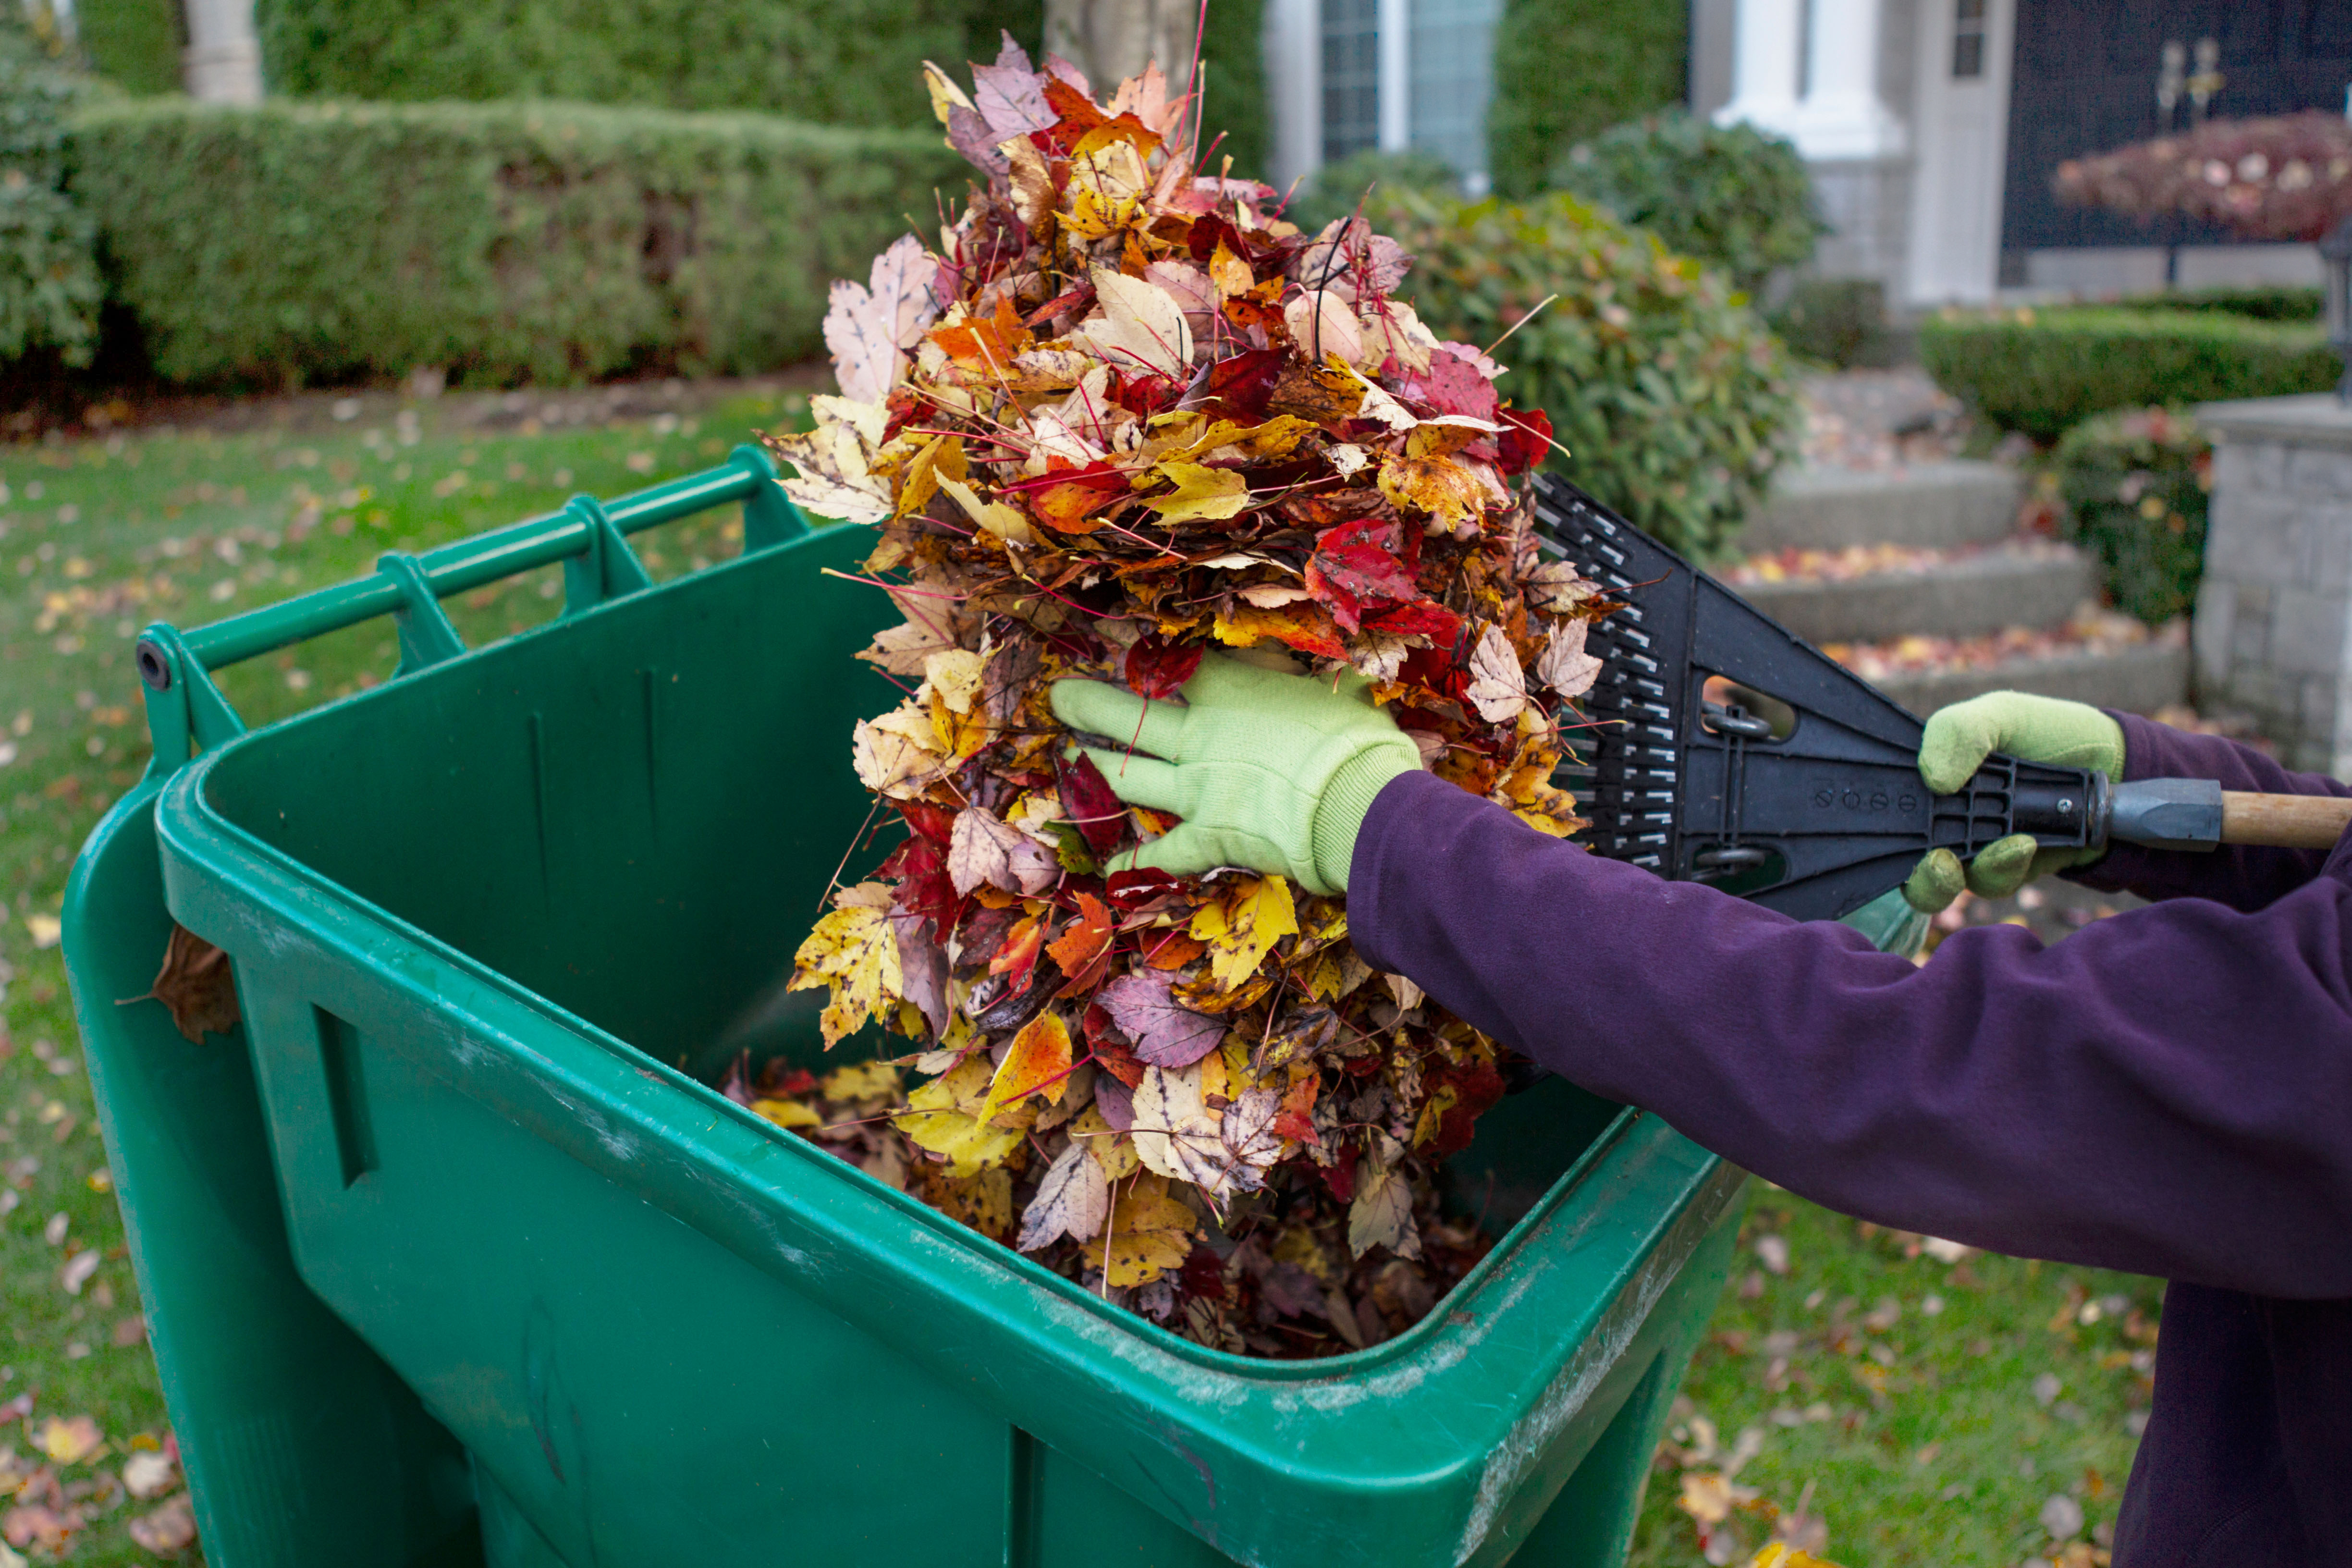 Photo of person throwing fallen leaves into greenwaste bin